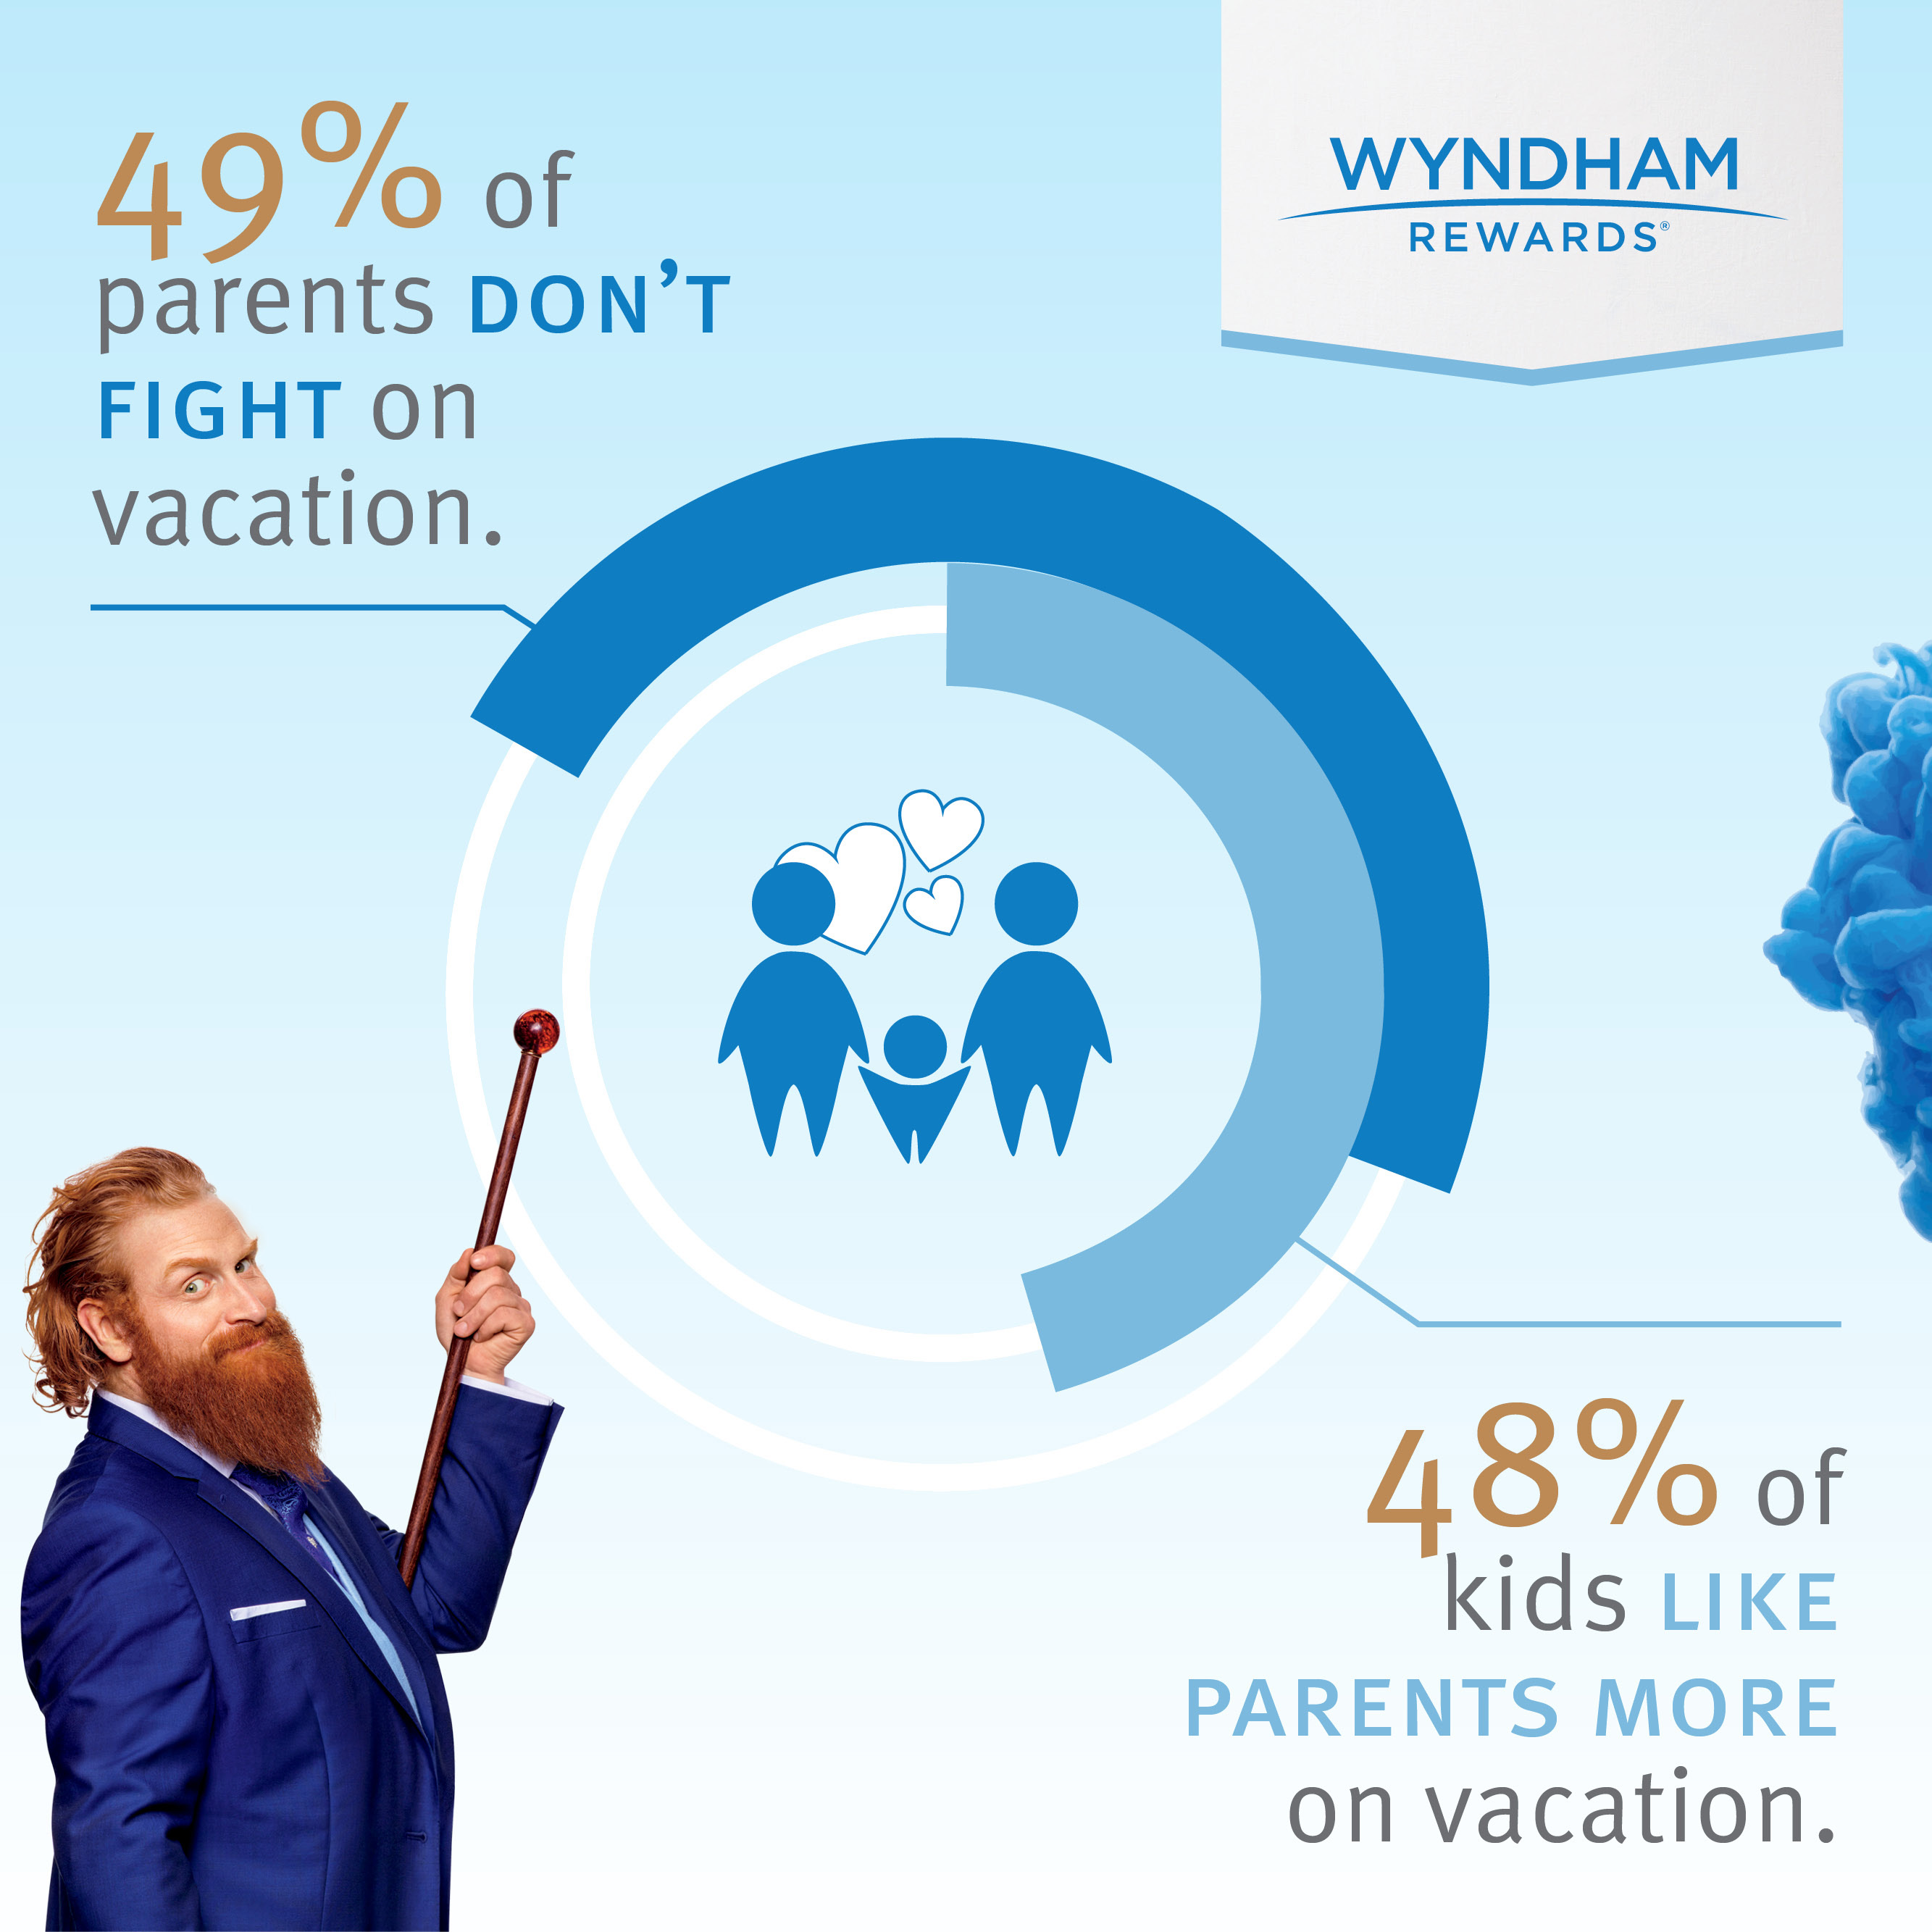 A new national survey by Wyndham Rewards found that 48% of kids like their parents more on vacation than when at home. 